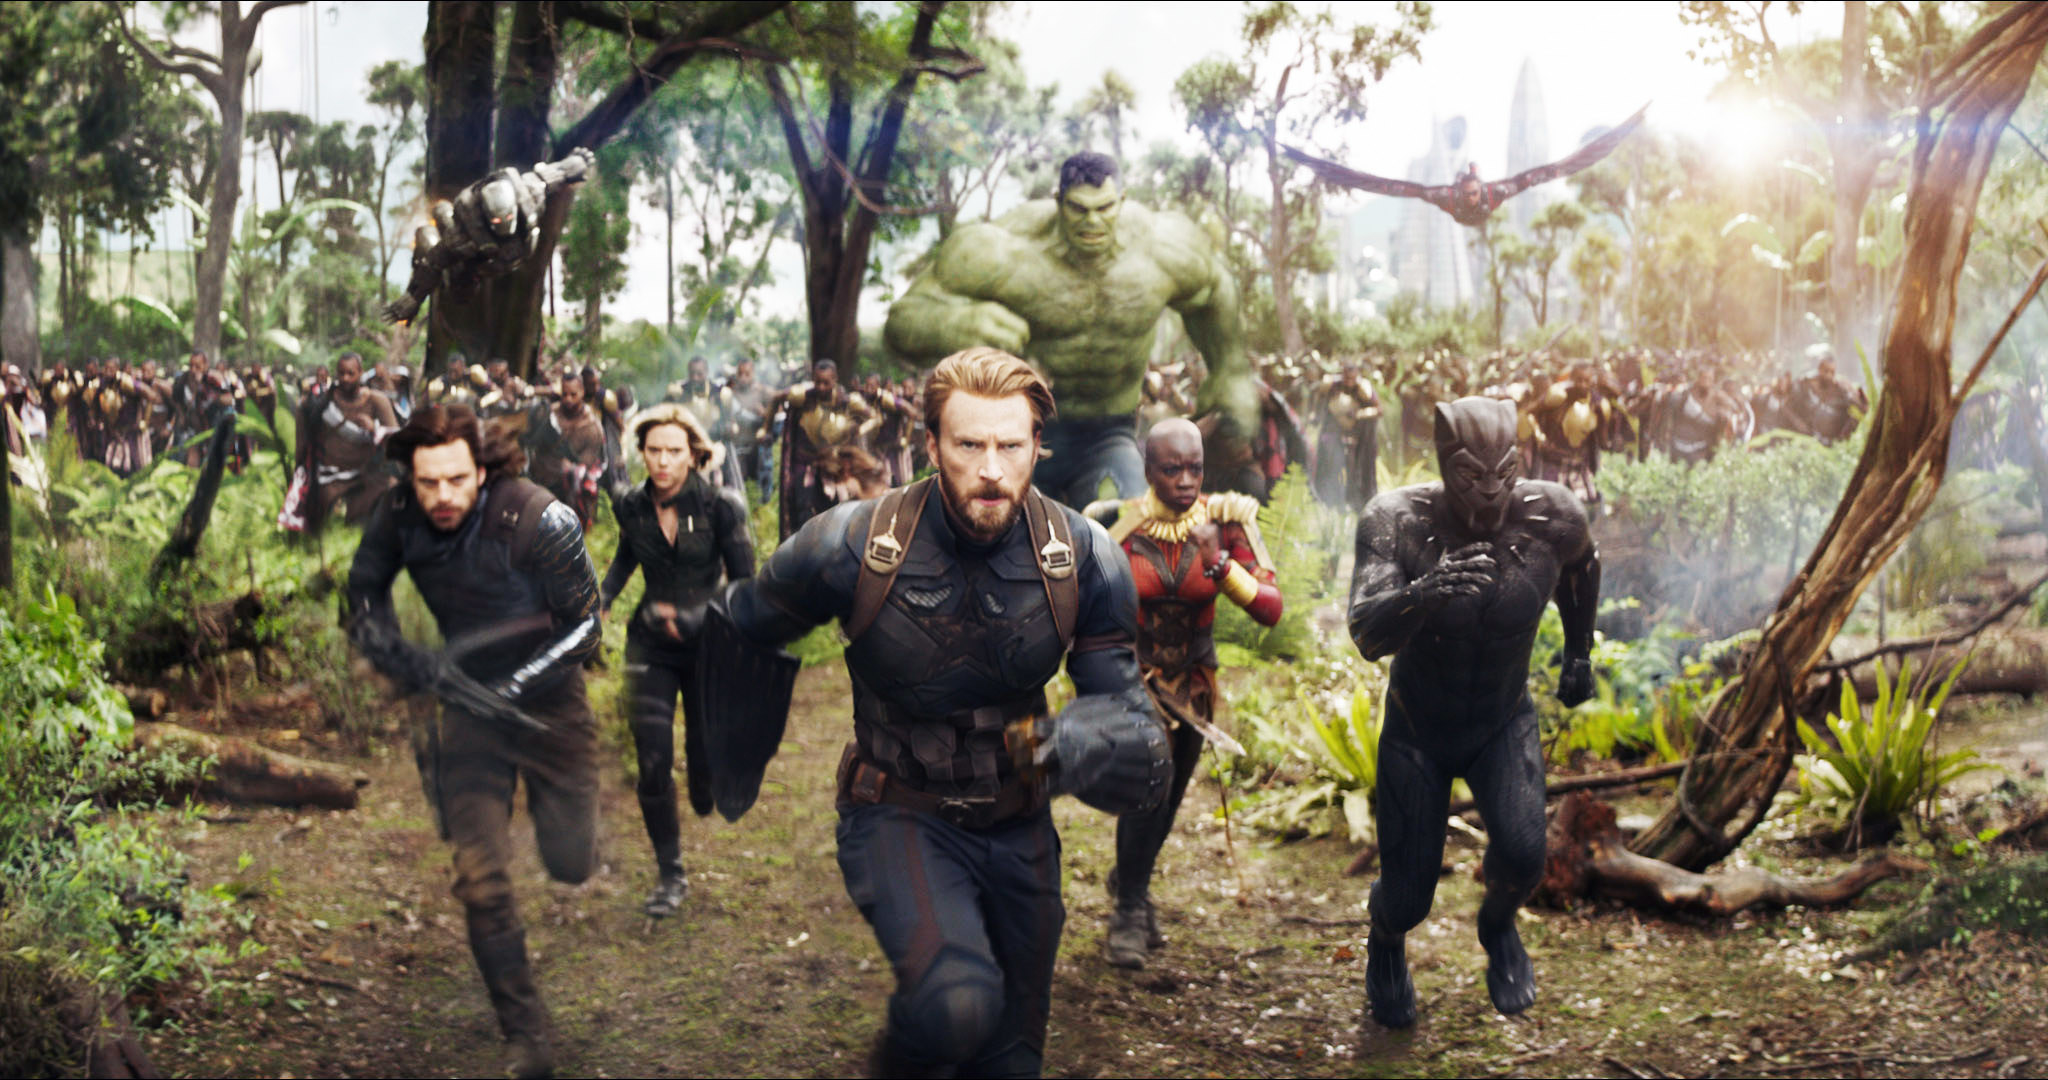 Several of the main cast members running toward a battle in The Avengers